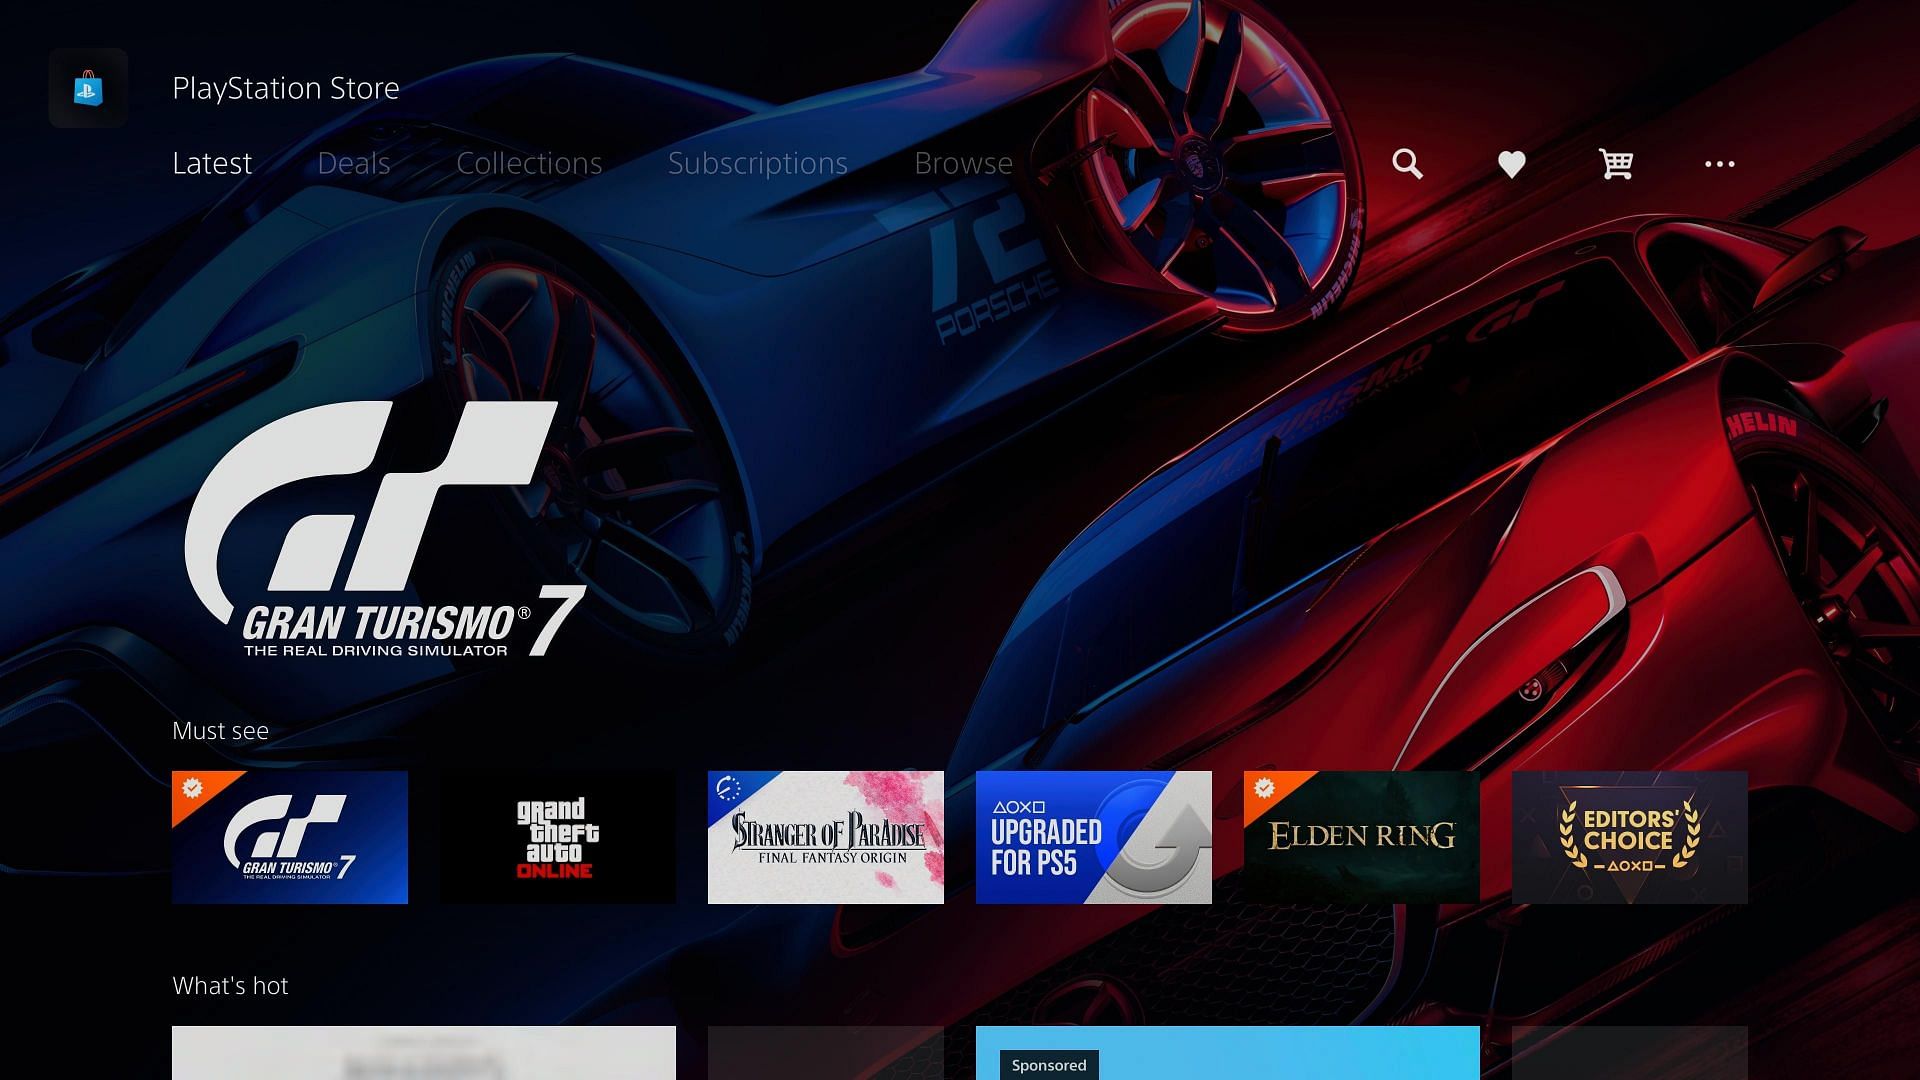 The PlayStation Store sells Gran Turismo 7, GTA 5, and other popular (or niche) games (Image via Sony)